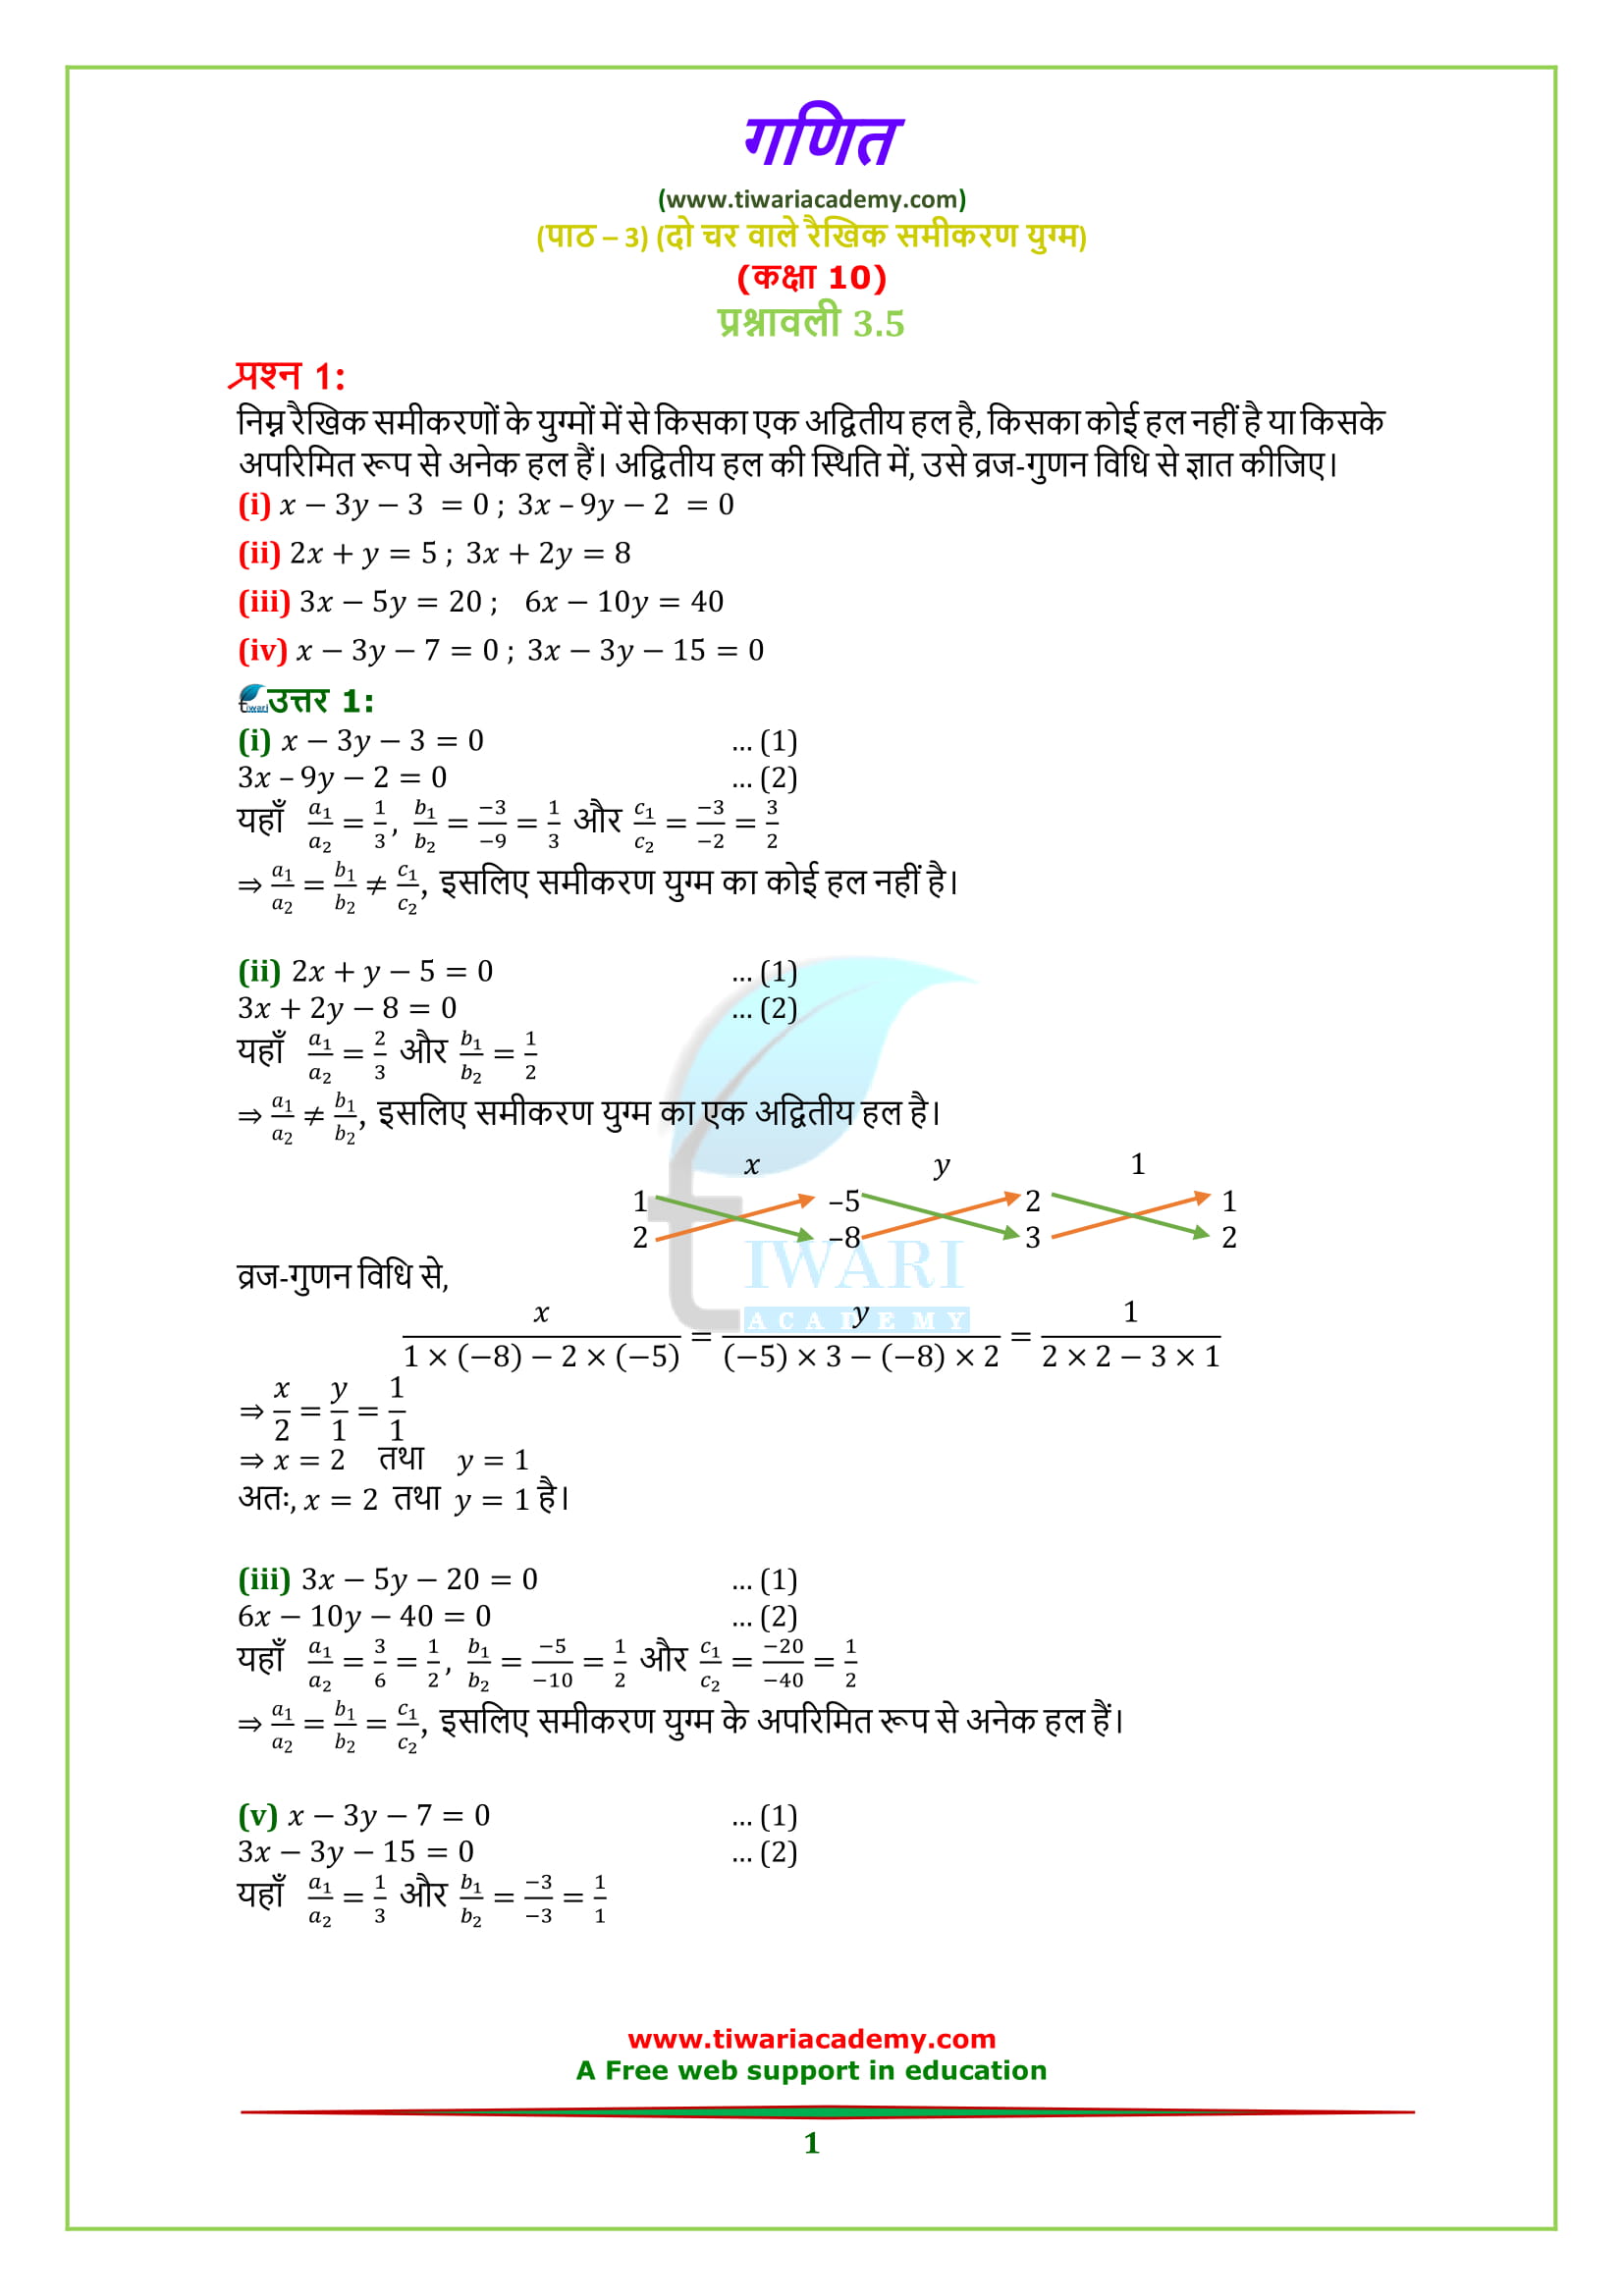 NCERT Solutions for class 10 Maths Chapter 3 Exercise 3.5 in Hindi medium